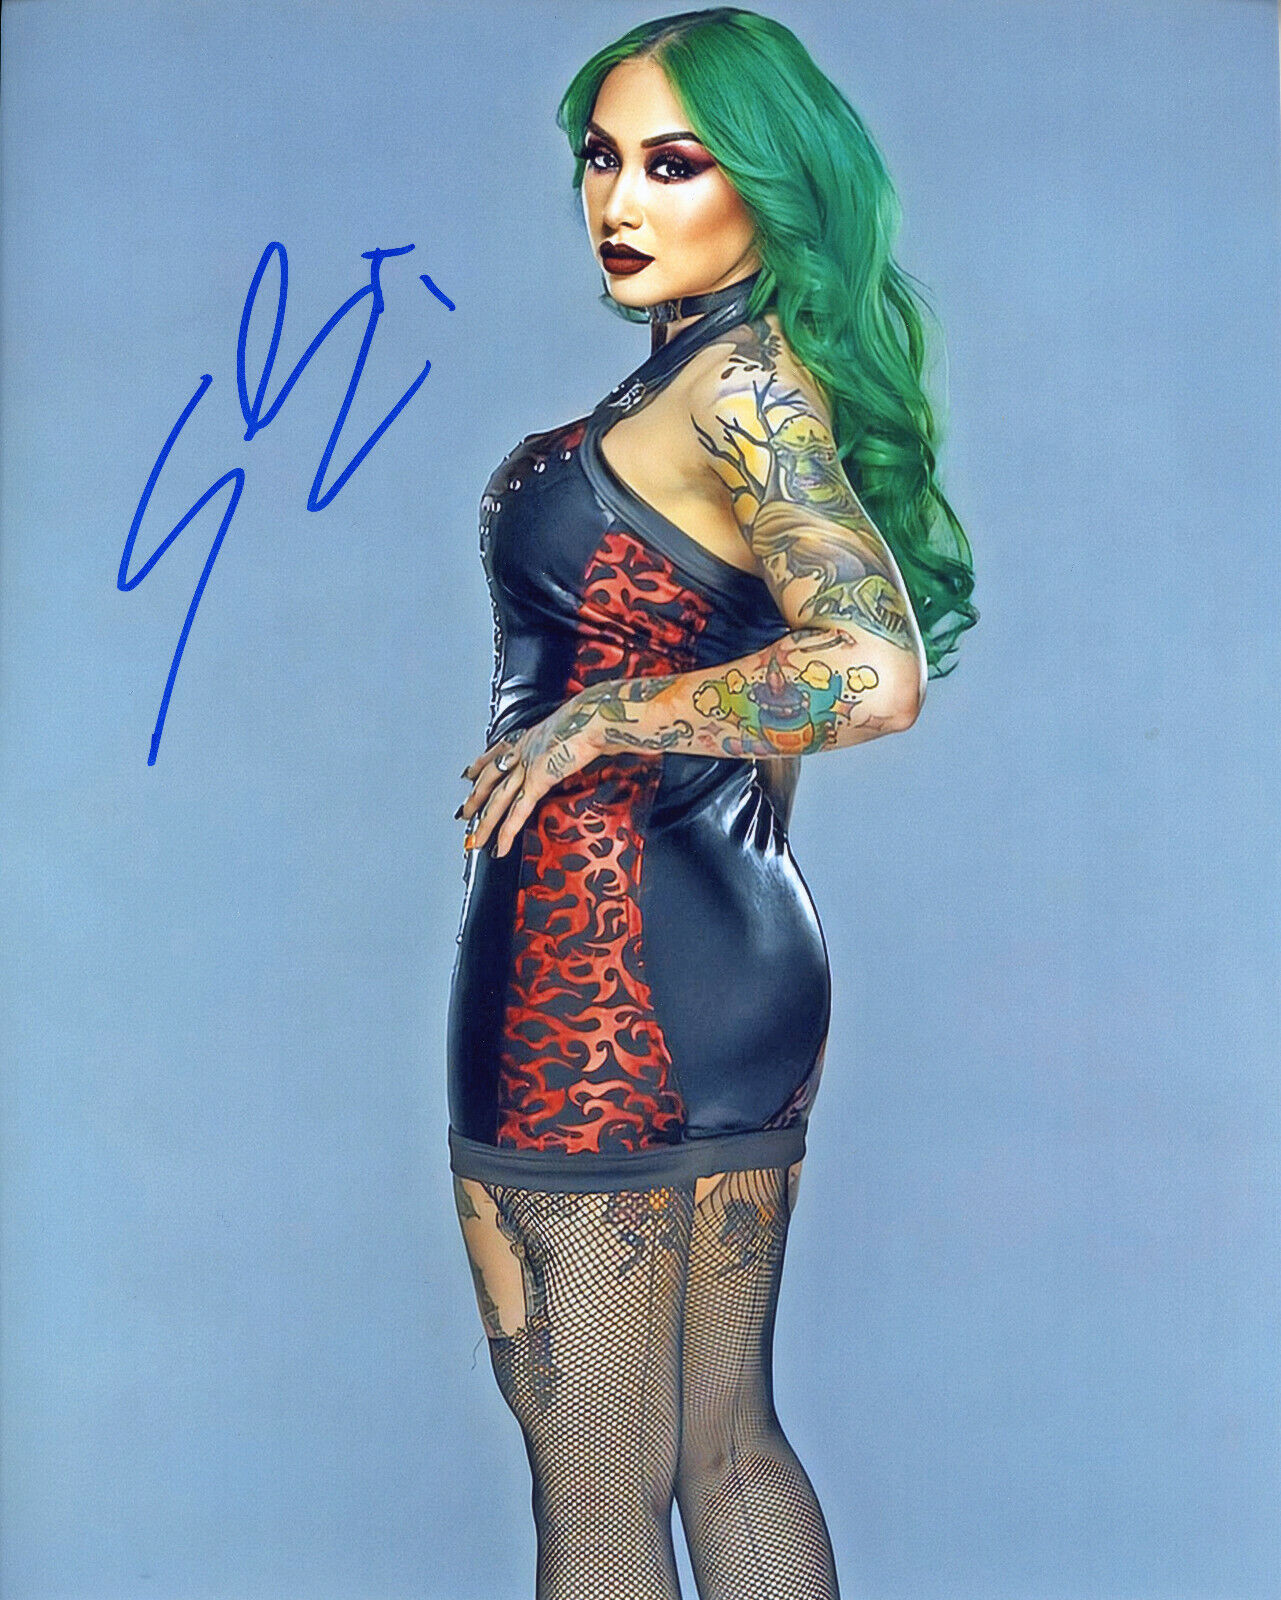 Shotzi Blackheart autographed 8x10 Sexy Hot In Person TNA WWE #24